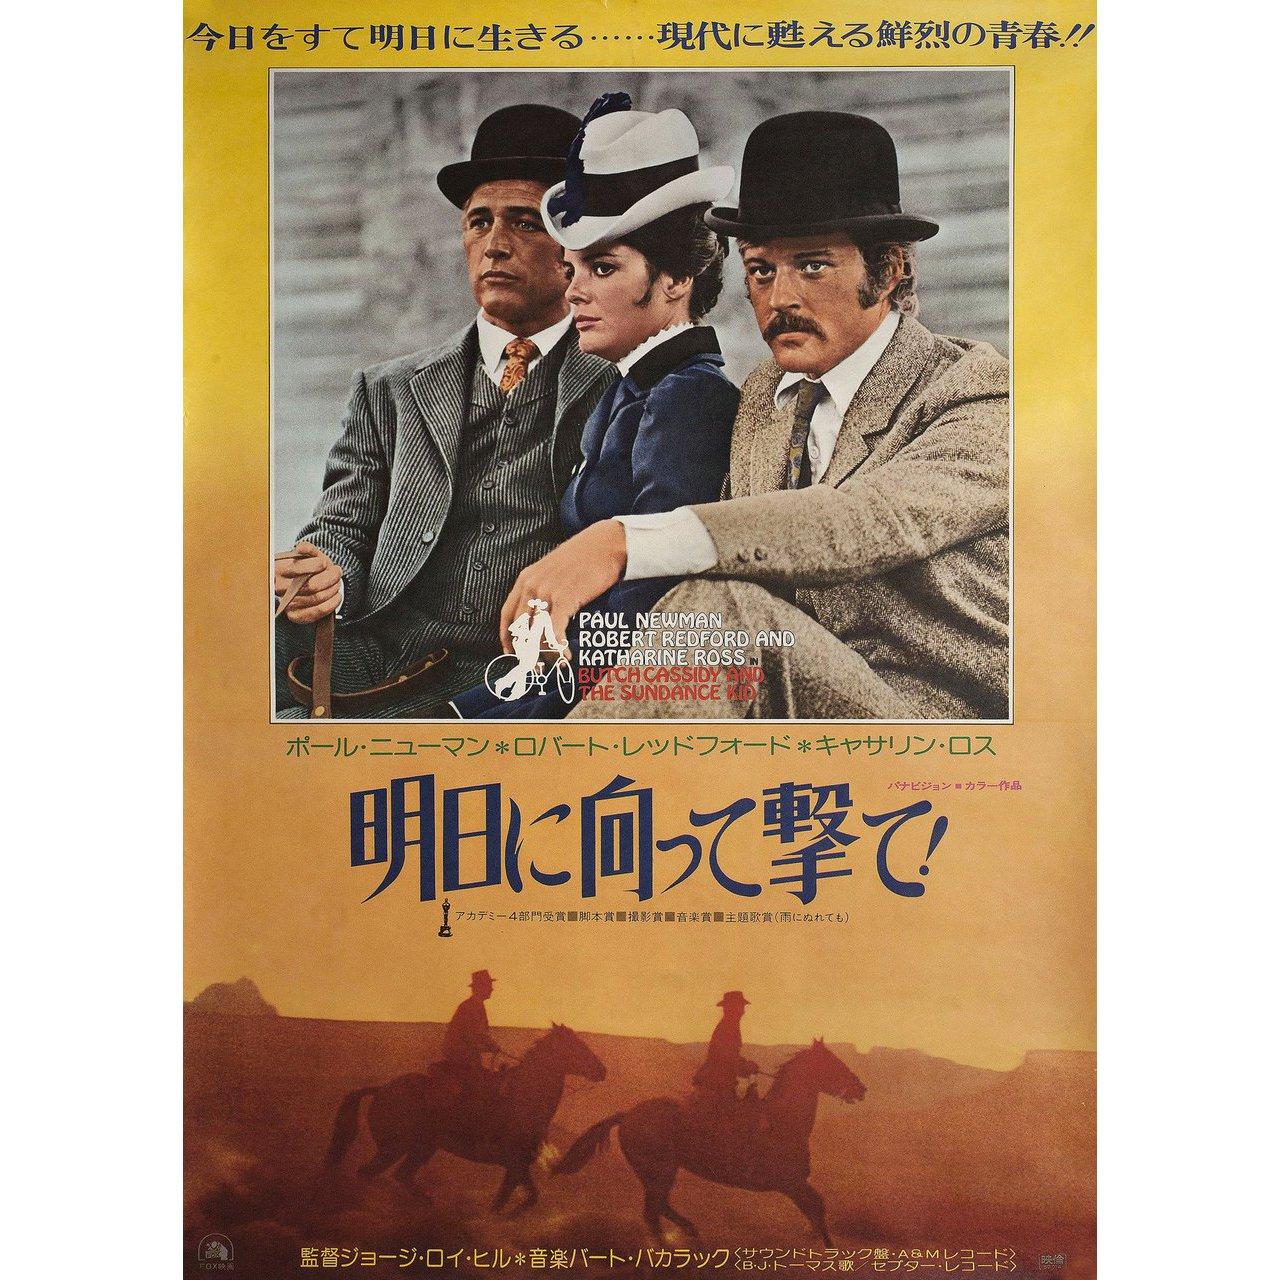 Original 1975 re-release Japanese B2 poster for the 1969 film Butch Cassidy and the Sundance Kid directed by George Roy Hill with Paul Newman / Robert Redford / Katharine Ross / Strother Martin. Fine condition, rolled. Please note: the size is